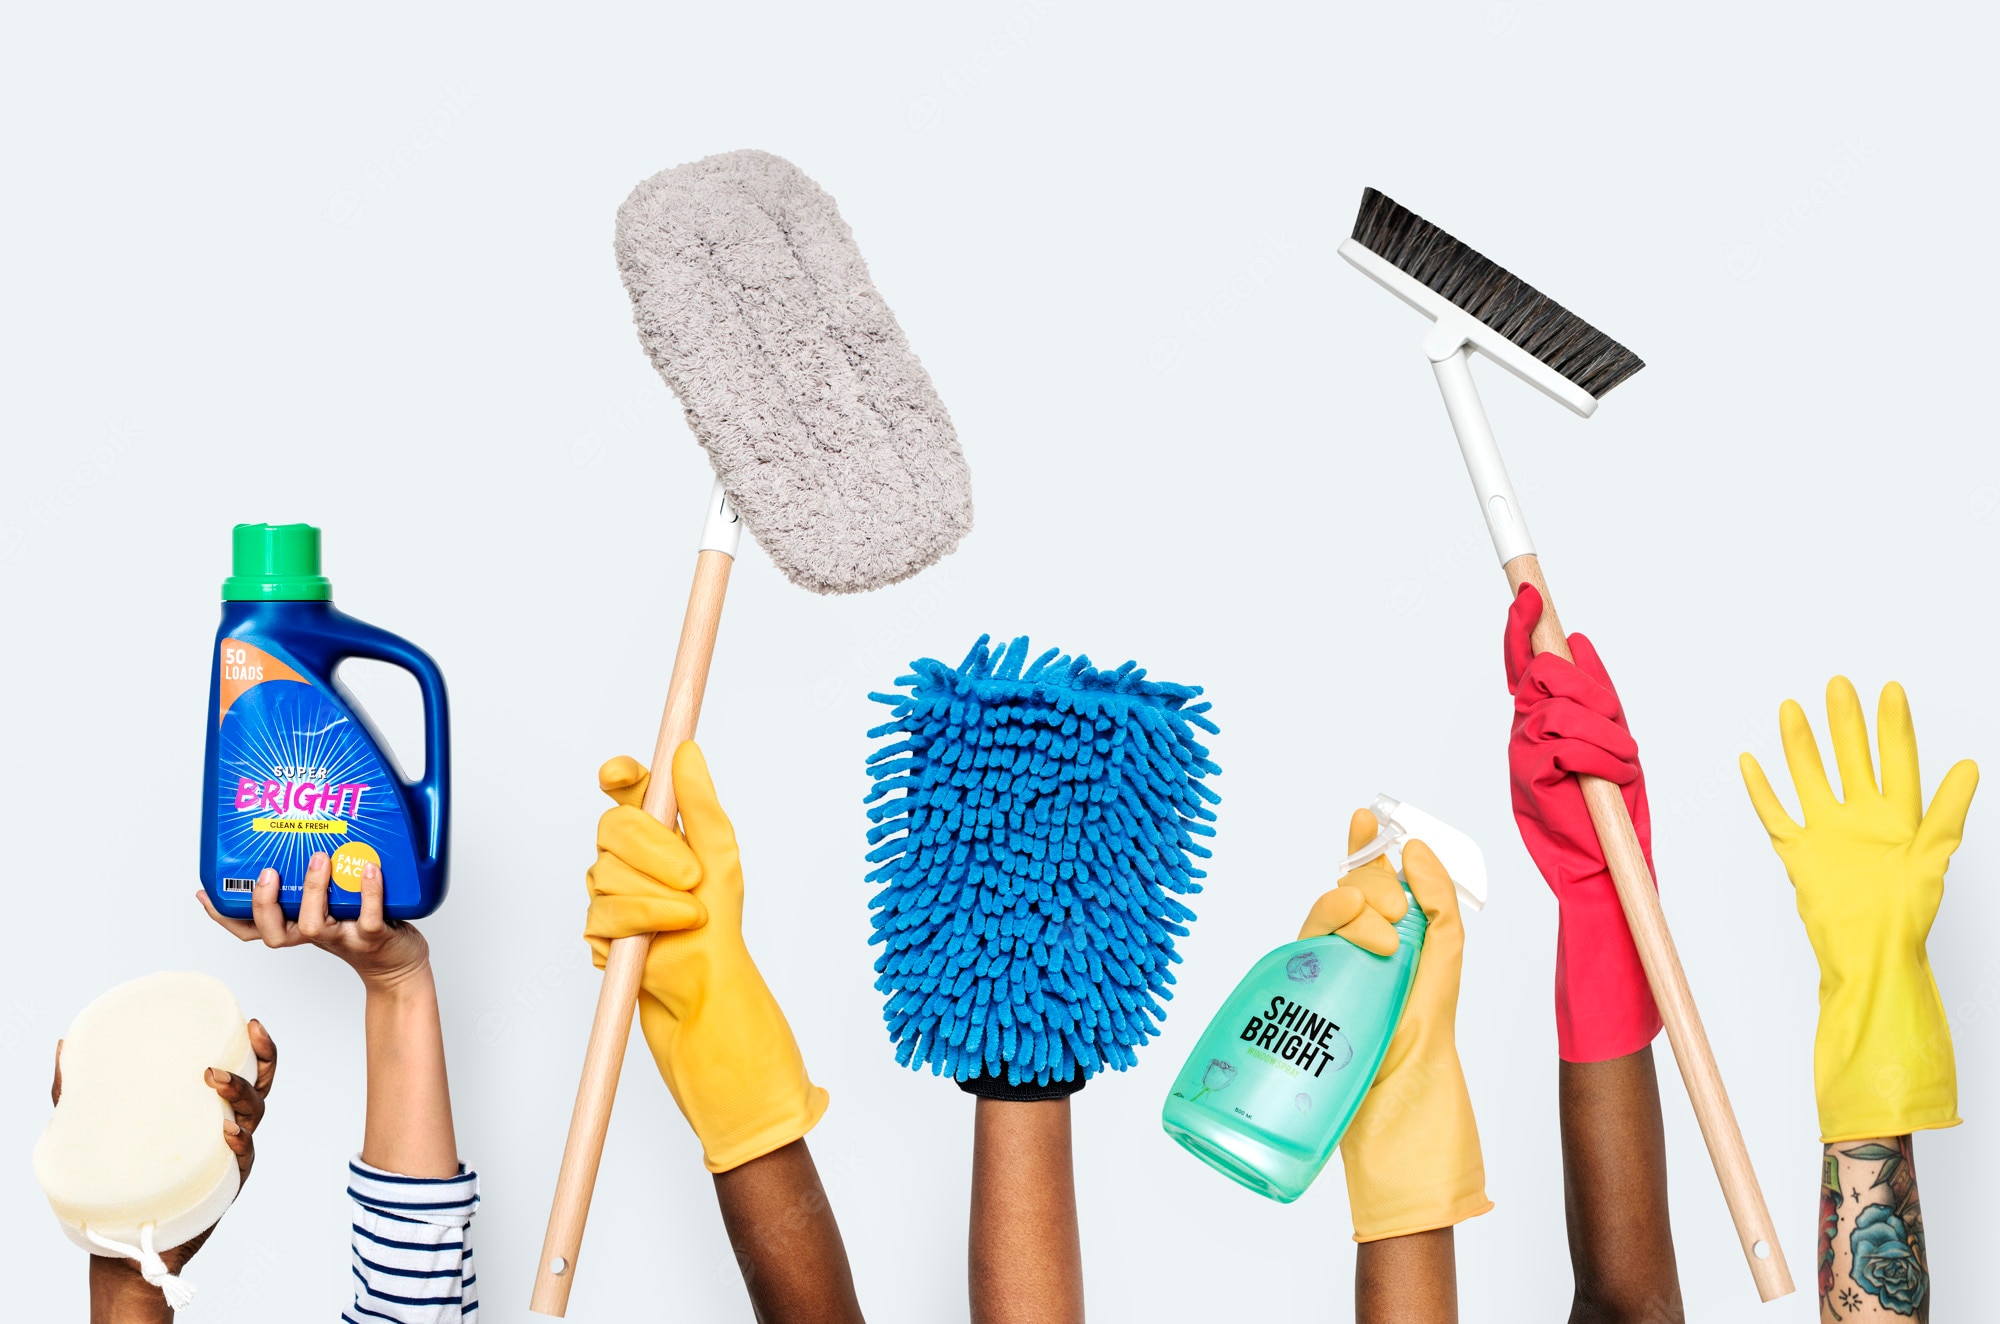 Cleaning Service Image. Free Vectors, & PSD